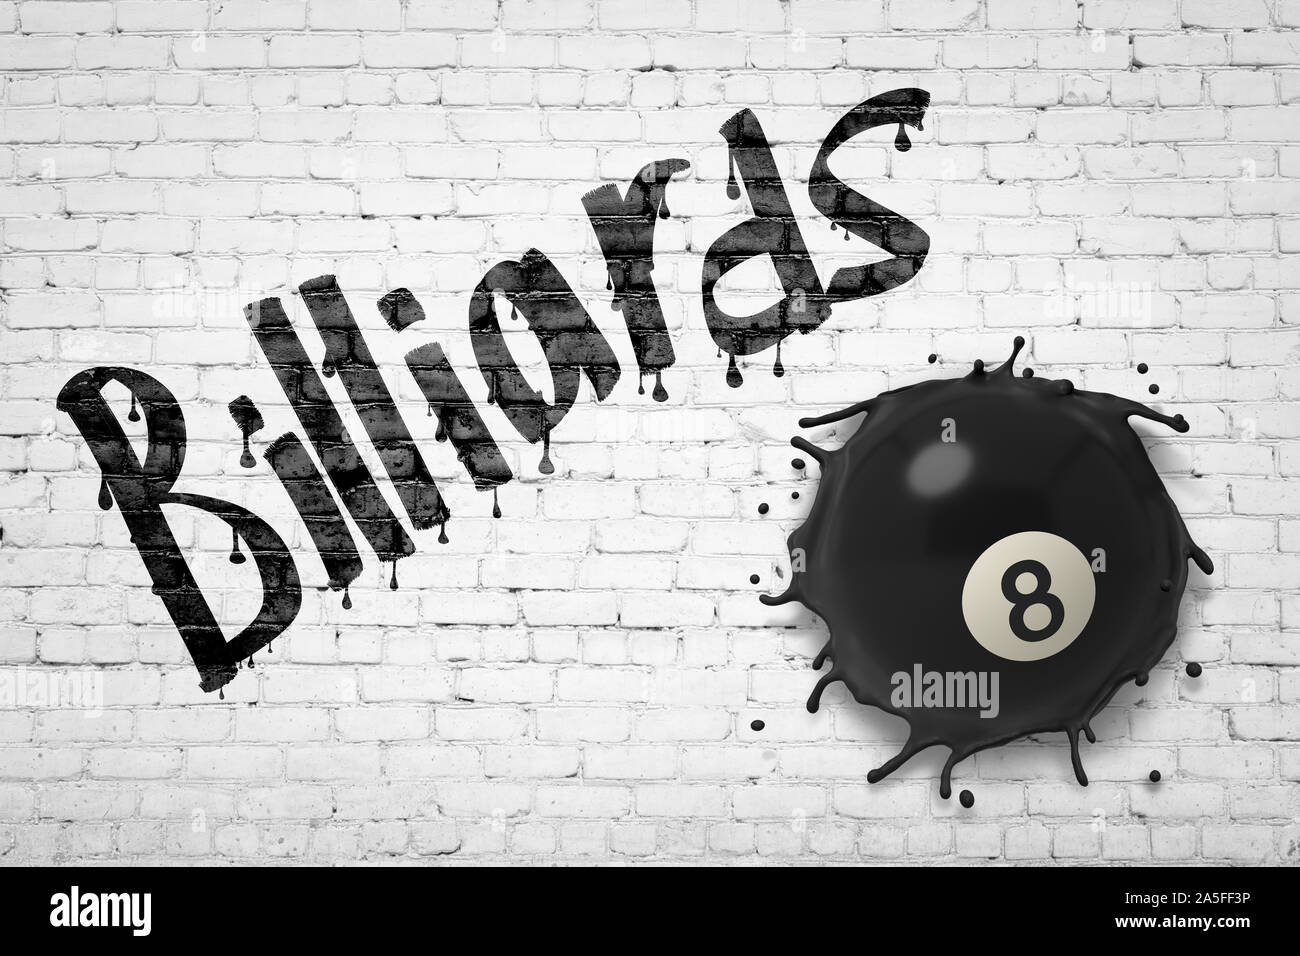 3d rendering of white brick wall with title 'Billiards', and black billiards ball with number 8 smashed into wall. Stock Photo